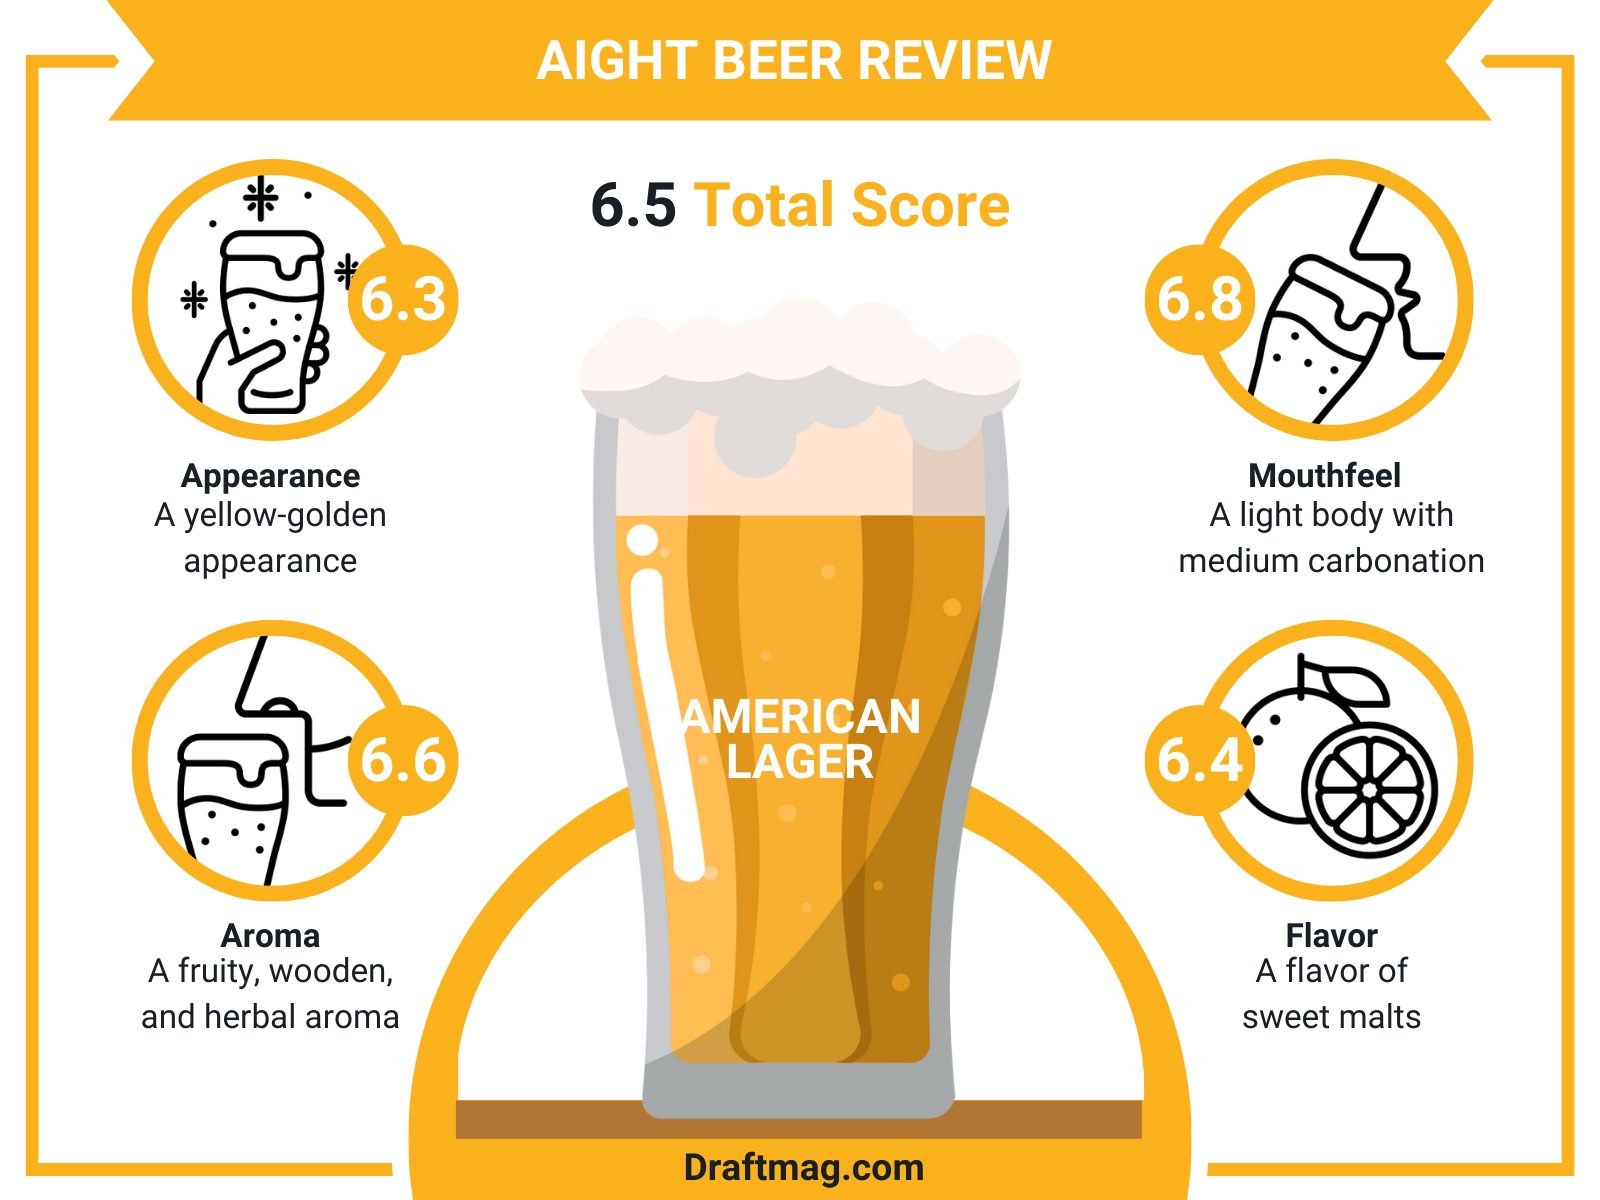 Aight Beer Review Infographic